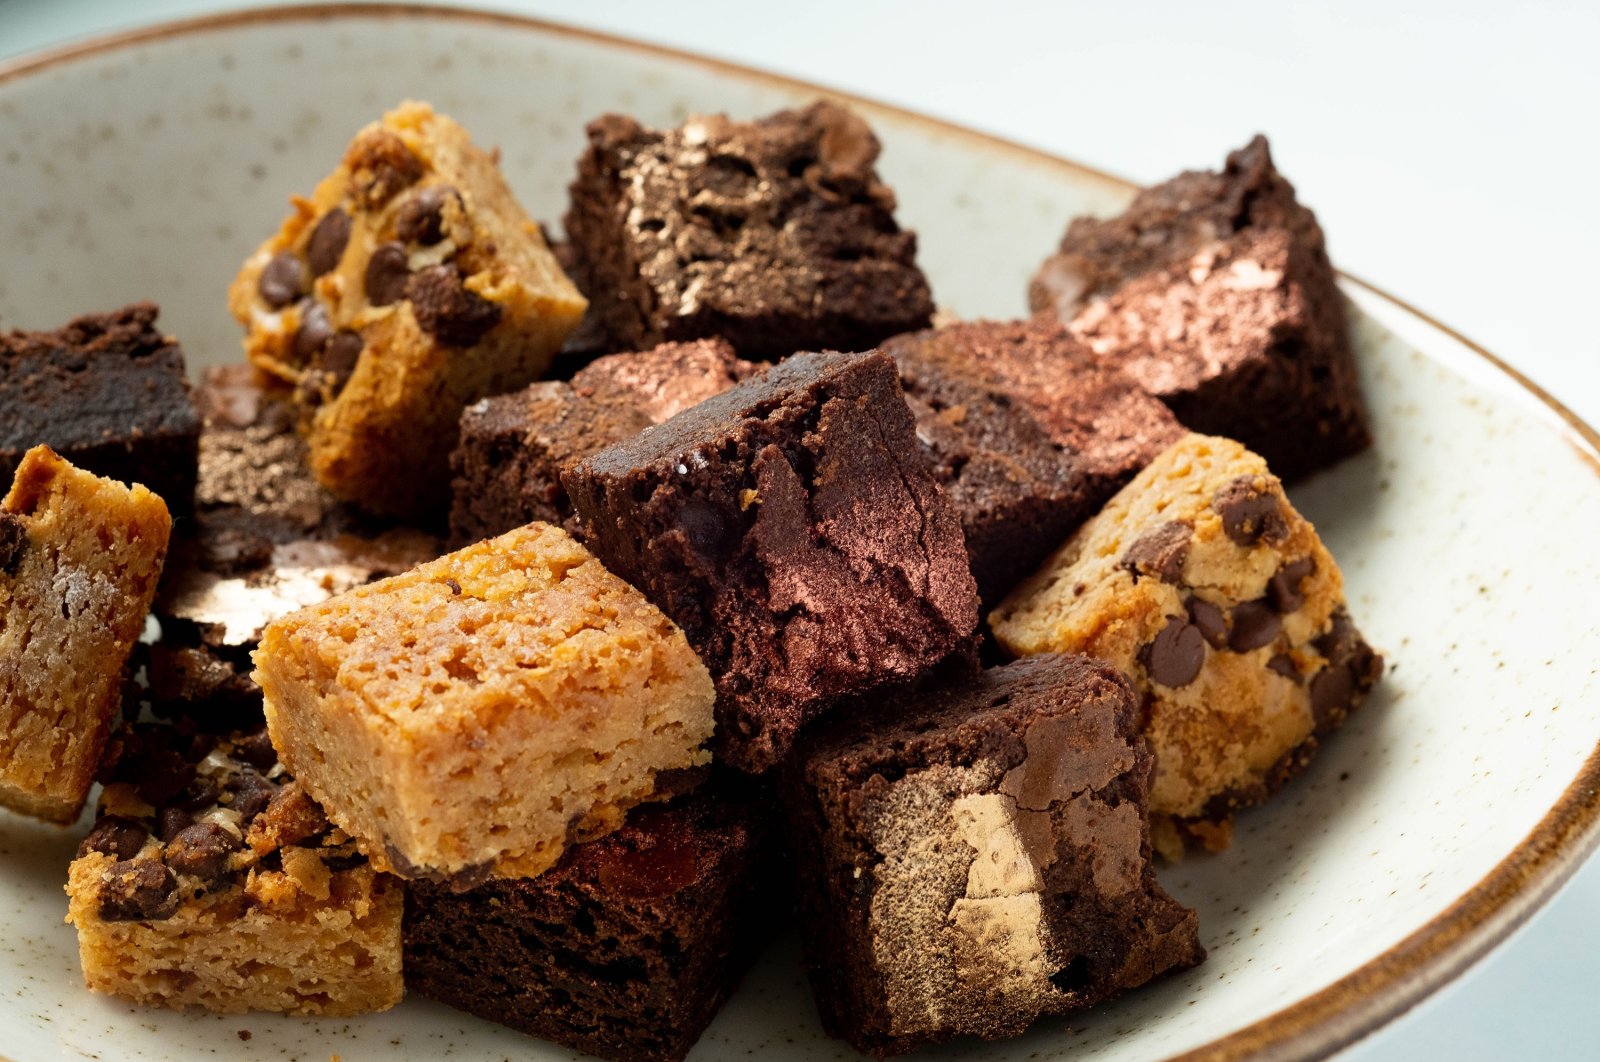 A bowl of brownies and blondies. (Shutterstock)